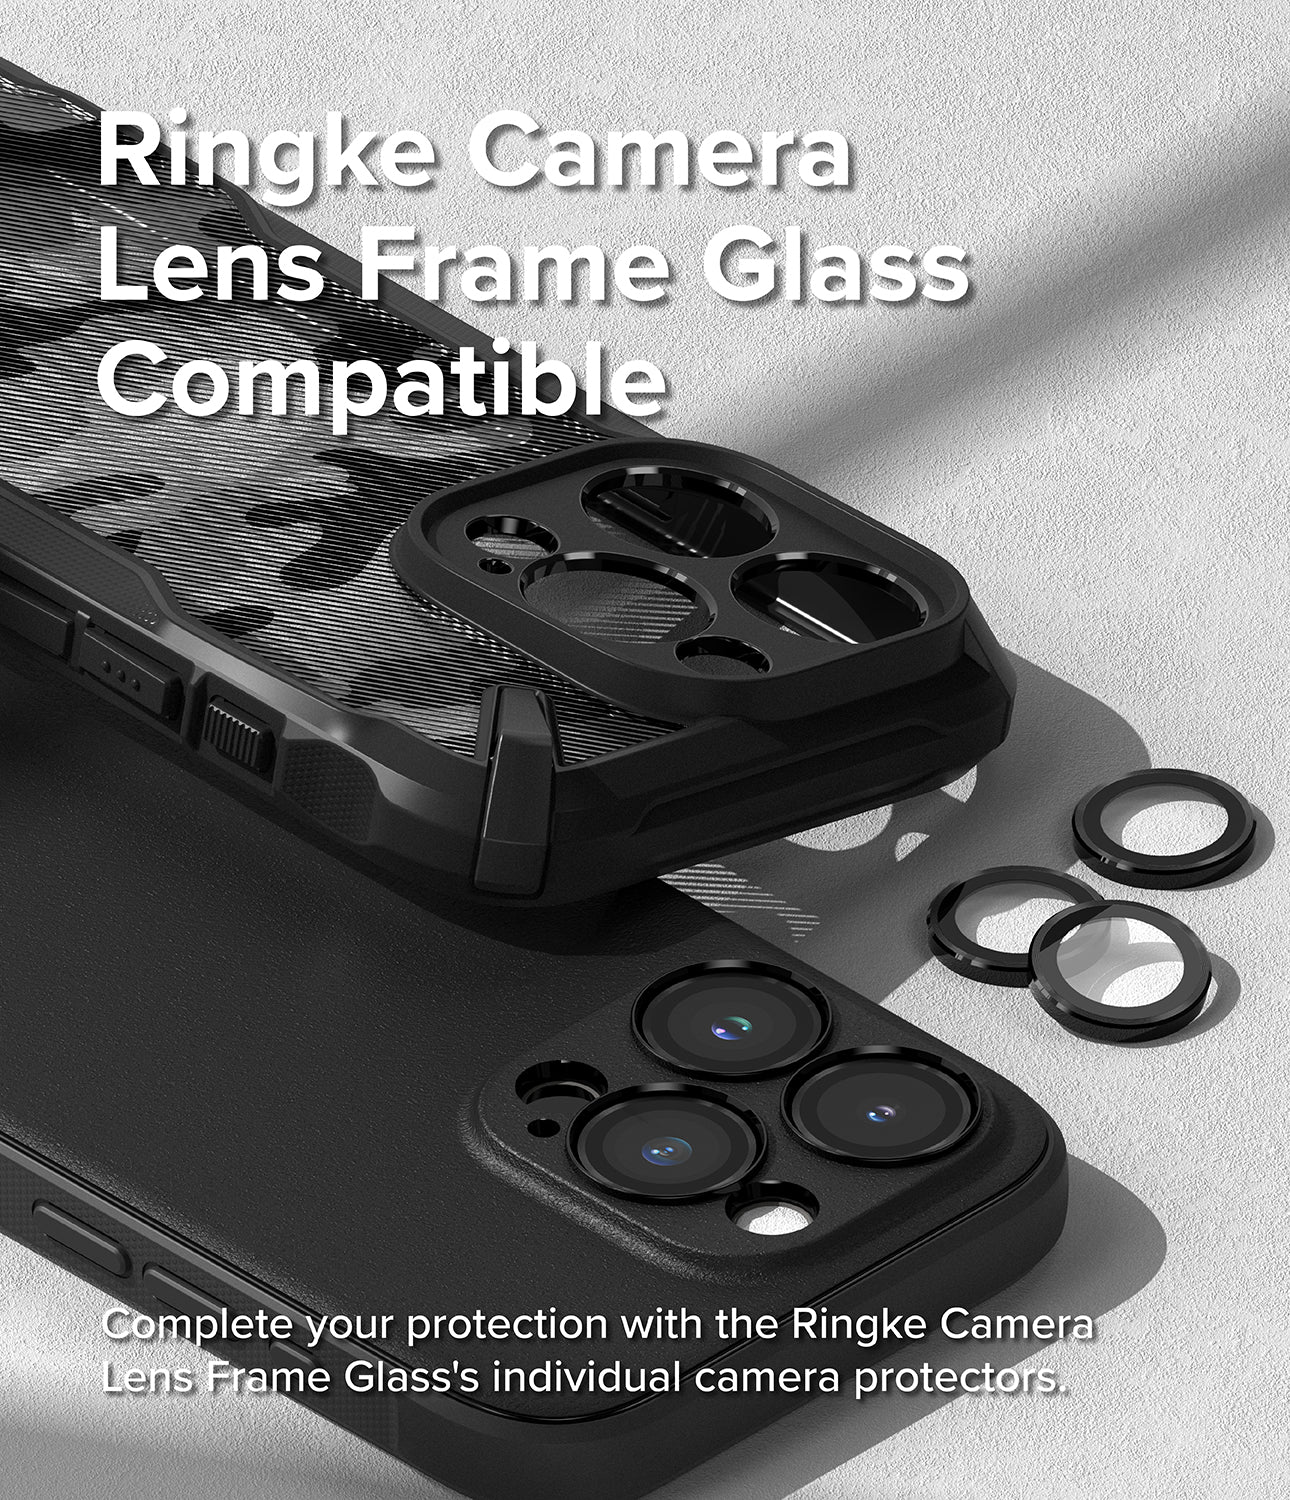 iPhone 15 Pro Max Case | Onyx - Dark Green - Ringke Camera Lens Frame Glass Compatible. Complete your protection with the Ringke Camera Lens Frame Glass' individual camera protectors.